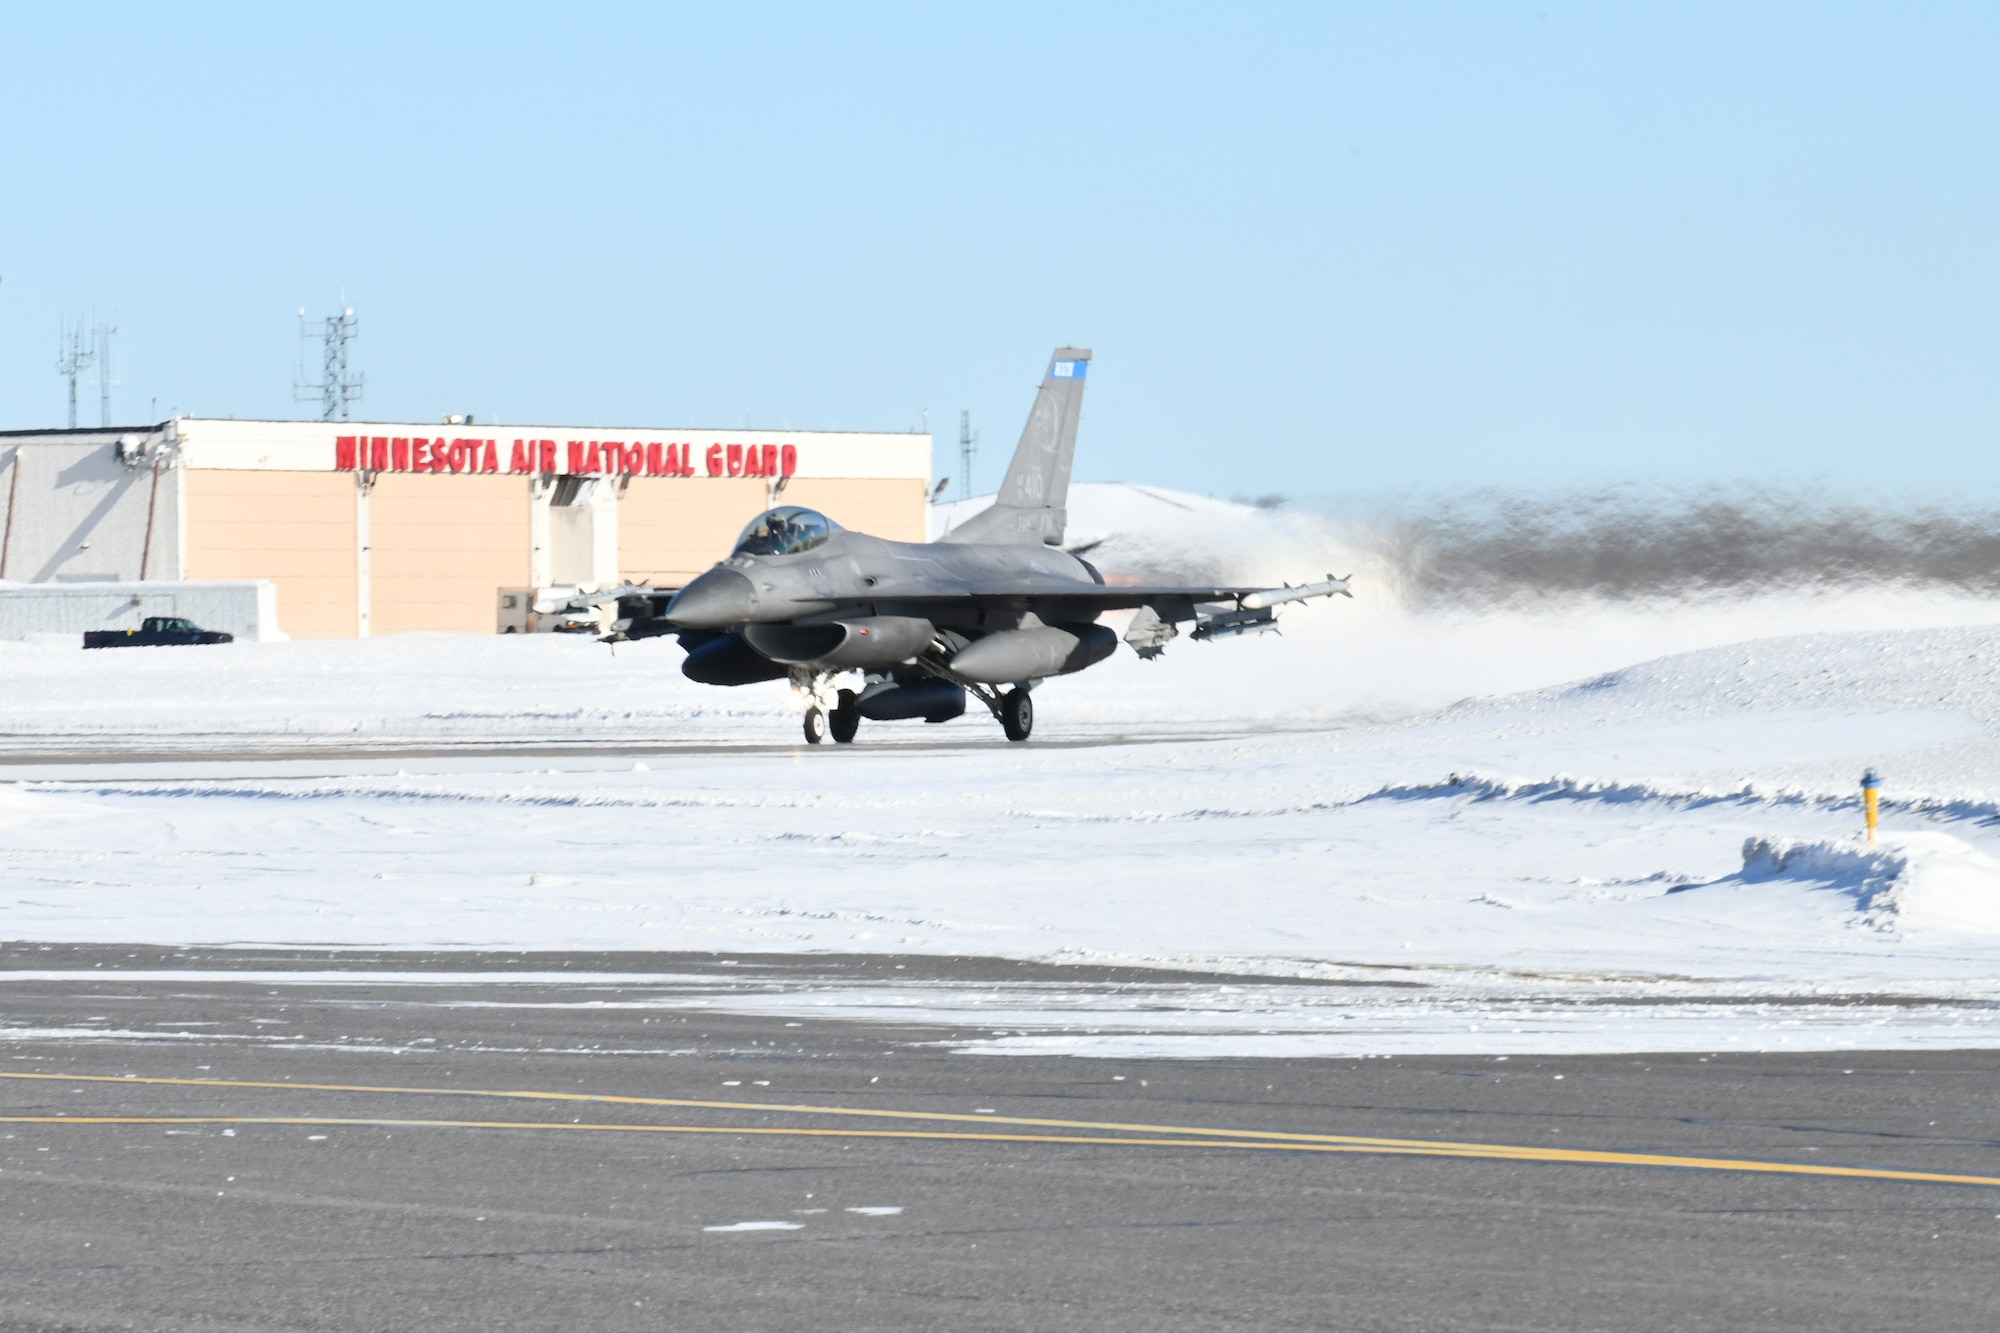 An F-16CM Fighting Falcon assigned to the 148th Fighter Wing, Minnesota Air National Guard, prepares to take off on January 26, 2023. This was the first flight for any Post-Block F-16 carrying the AN/ASQ-236 radar pod. The 148th Fighter Wing has been designated as the Air National Guard’s Center for Excellence for all F-16 fighter aircraft.